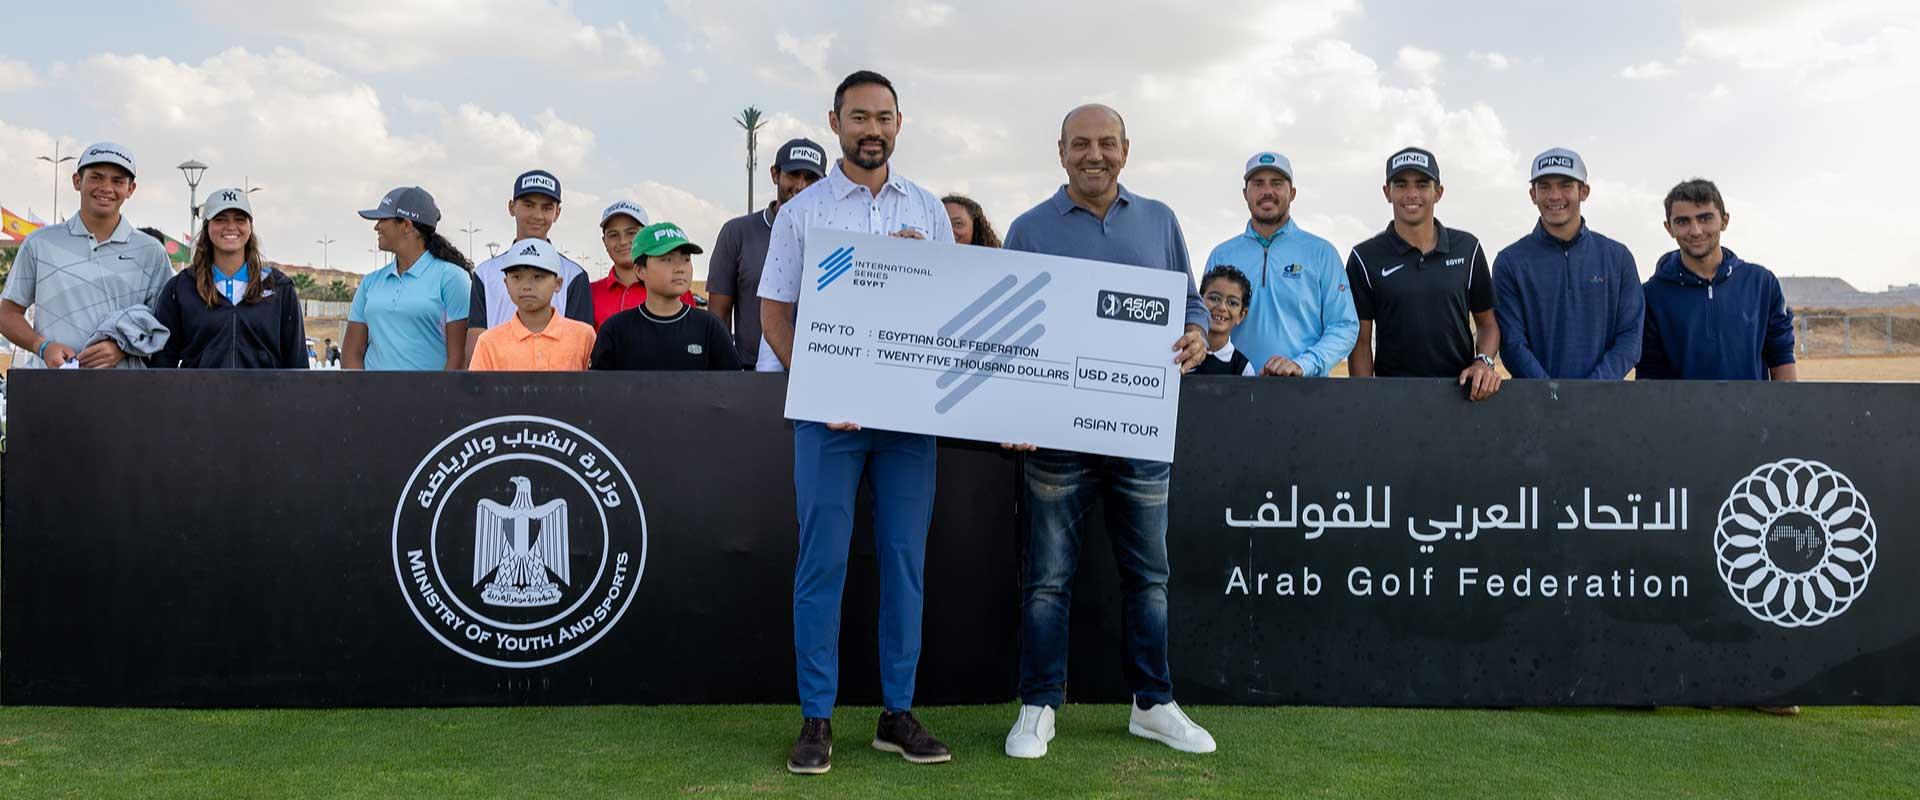 Asian Tour confirms support for development of grassroots golf in Egypt